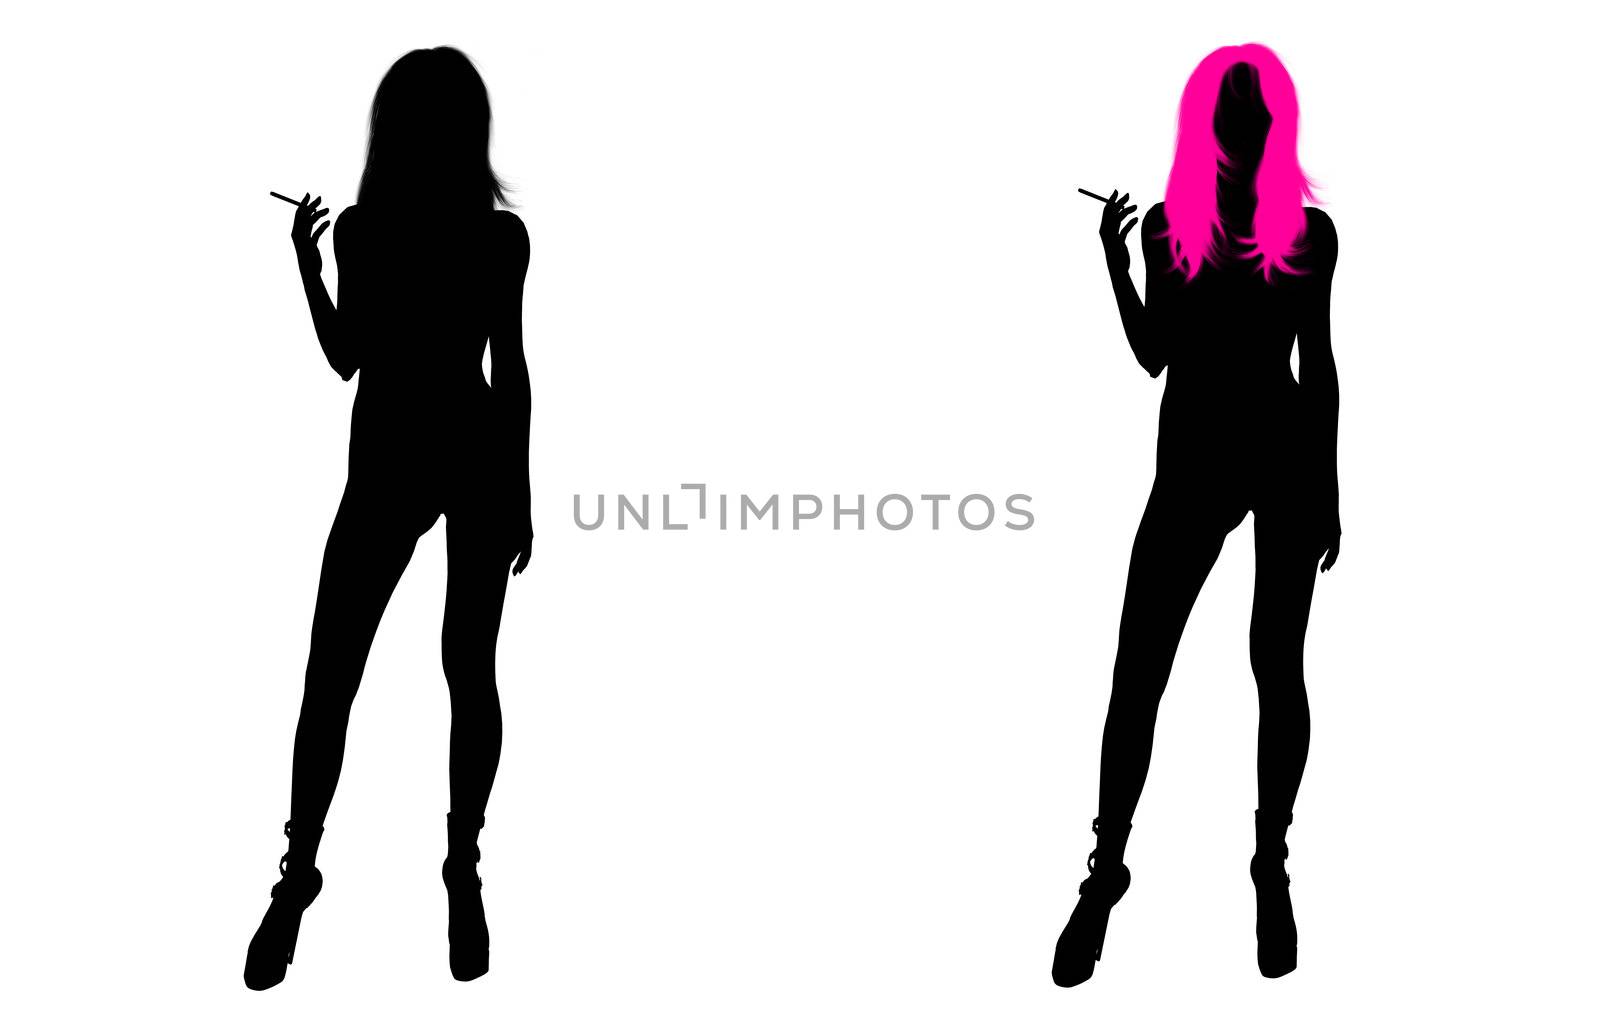 One woman silhouette with pink hair and one woman without